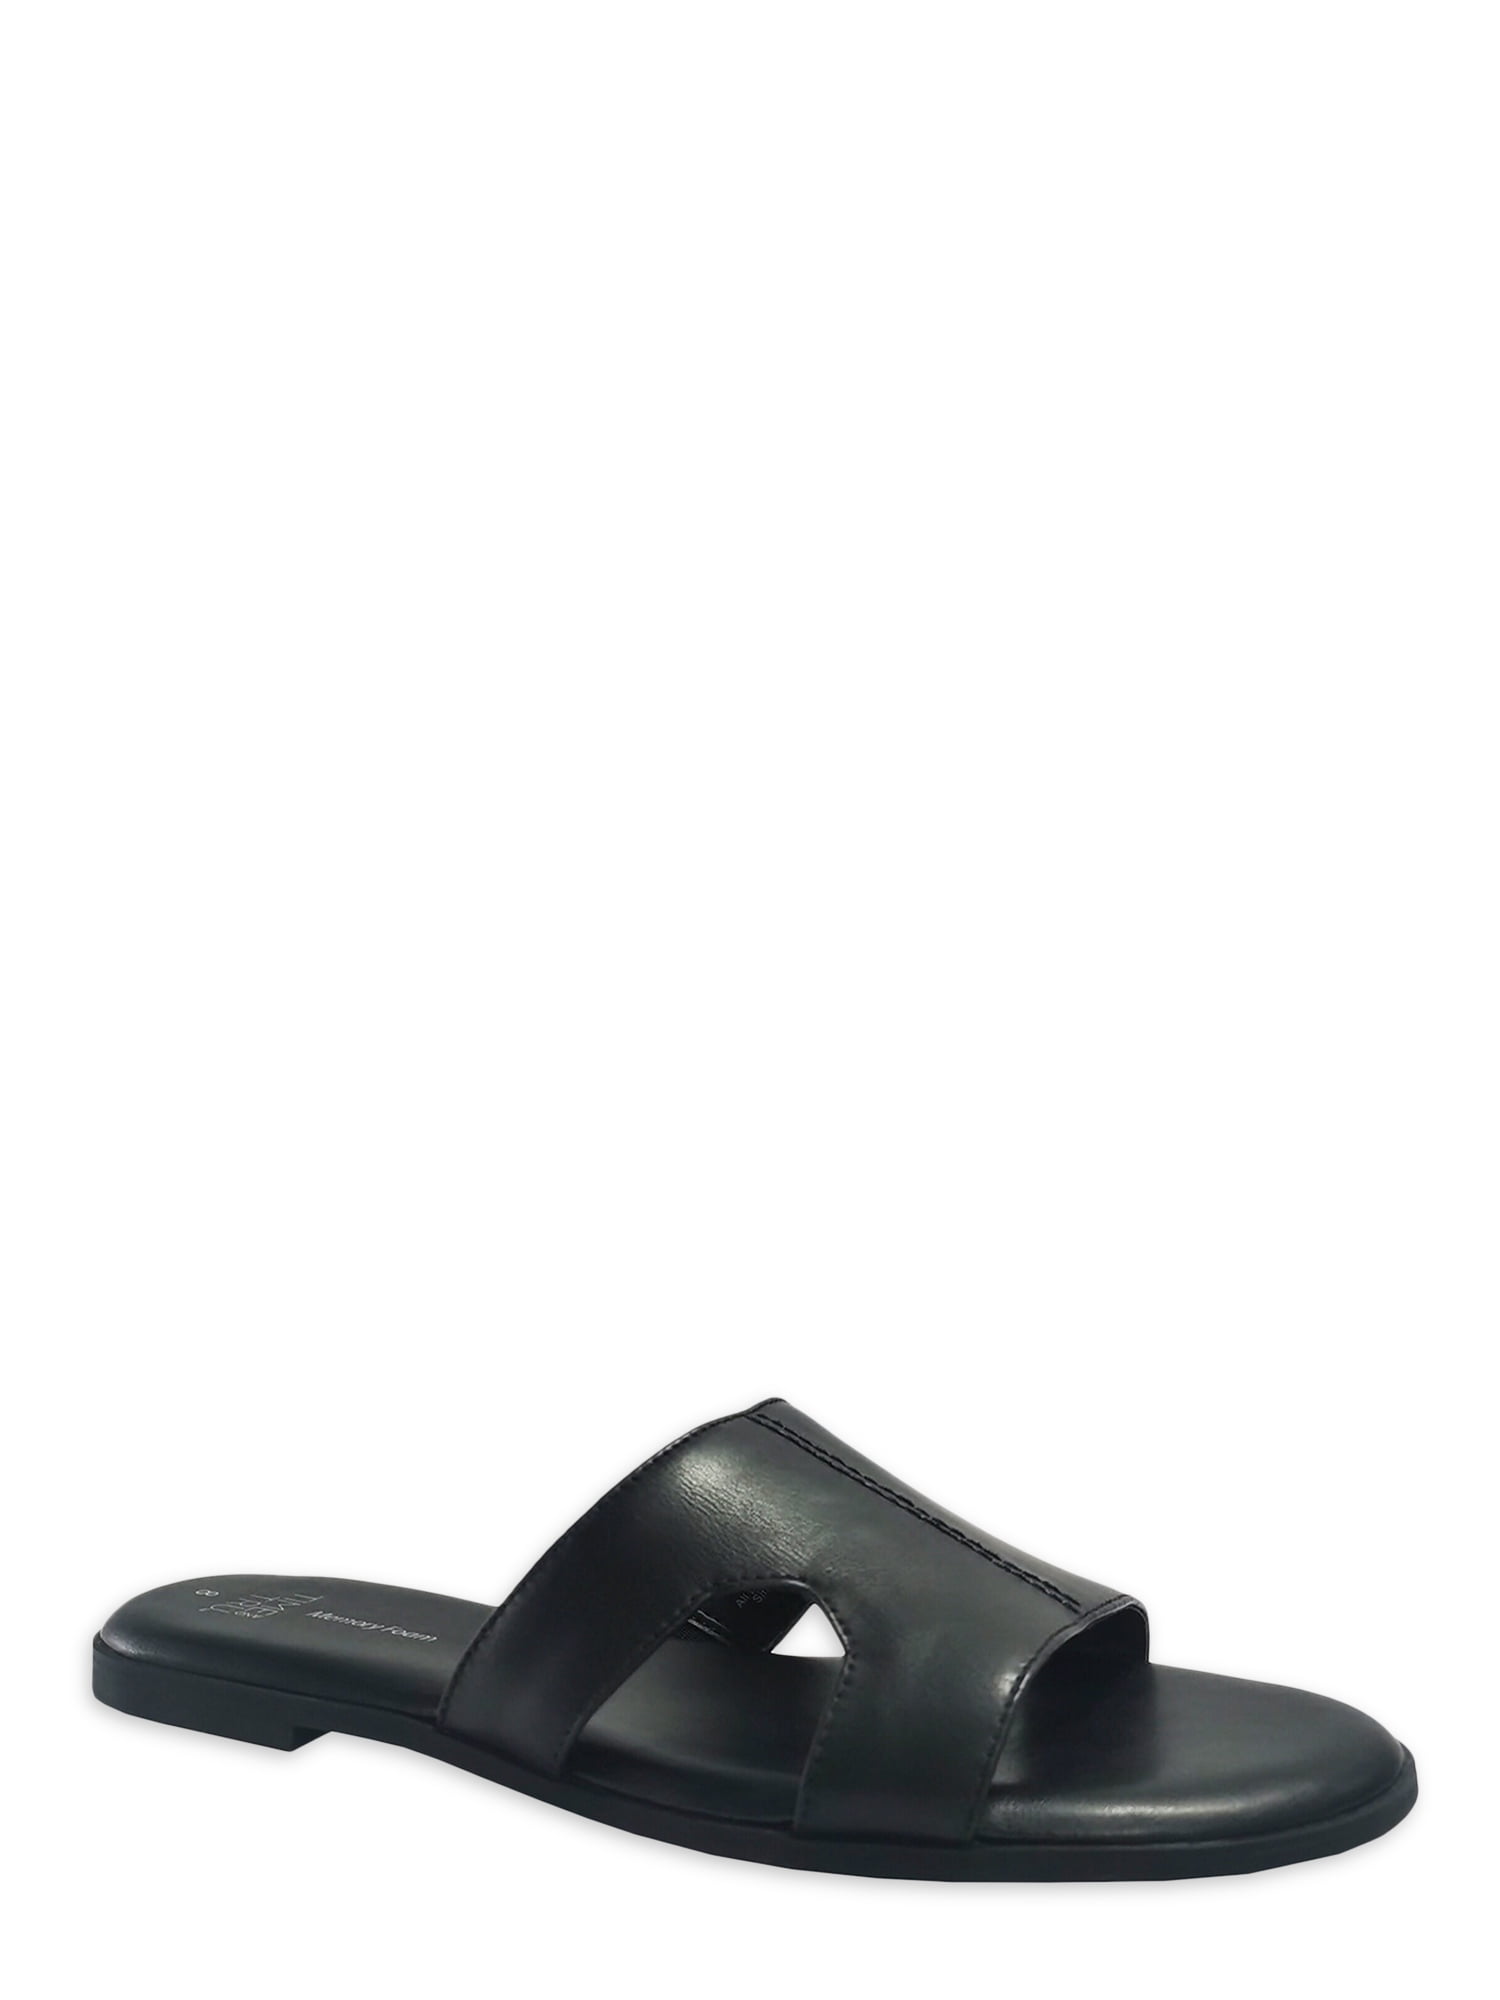 Time and Tru Women's H-band Sandal